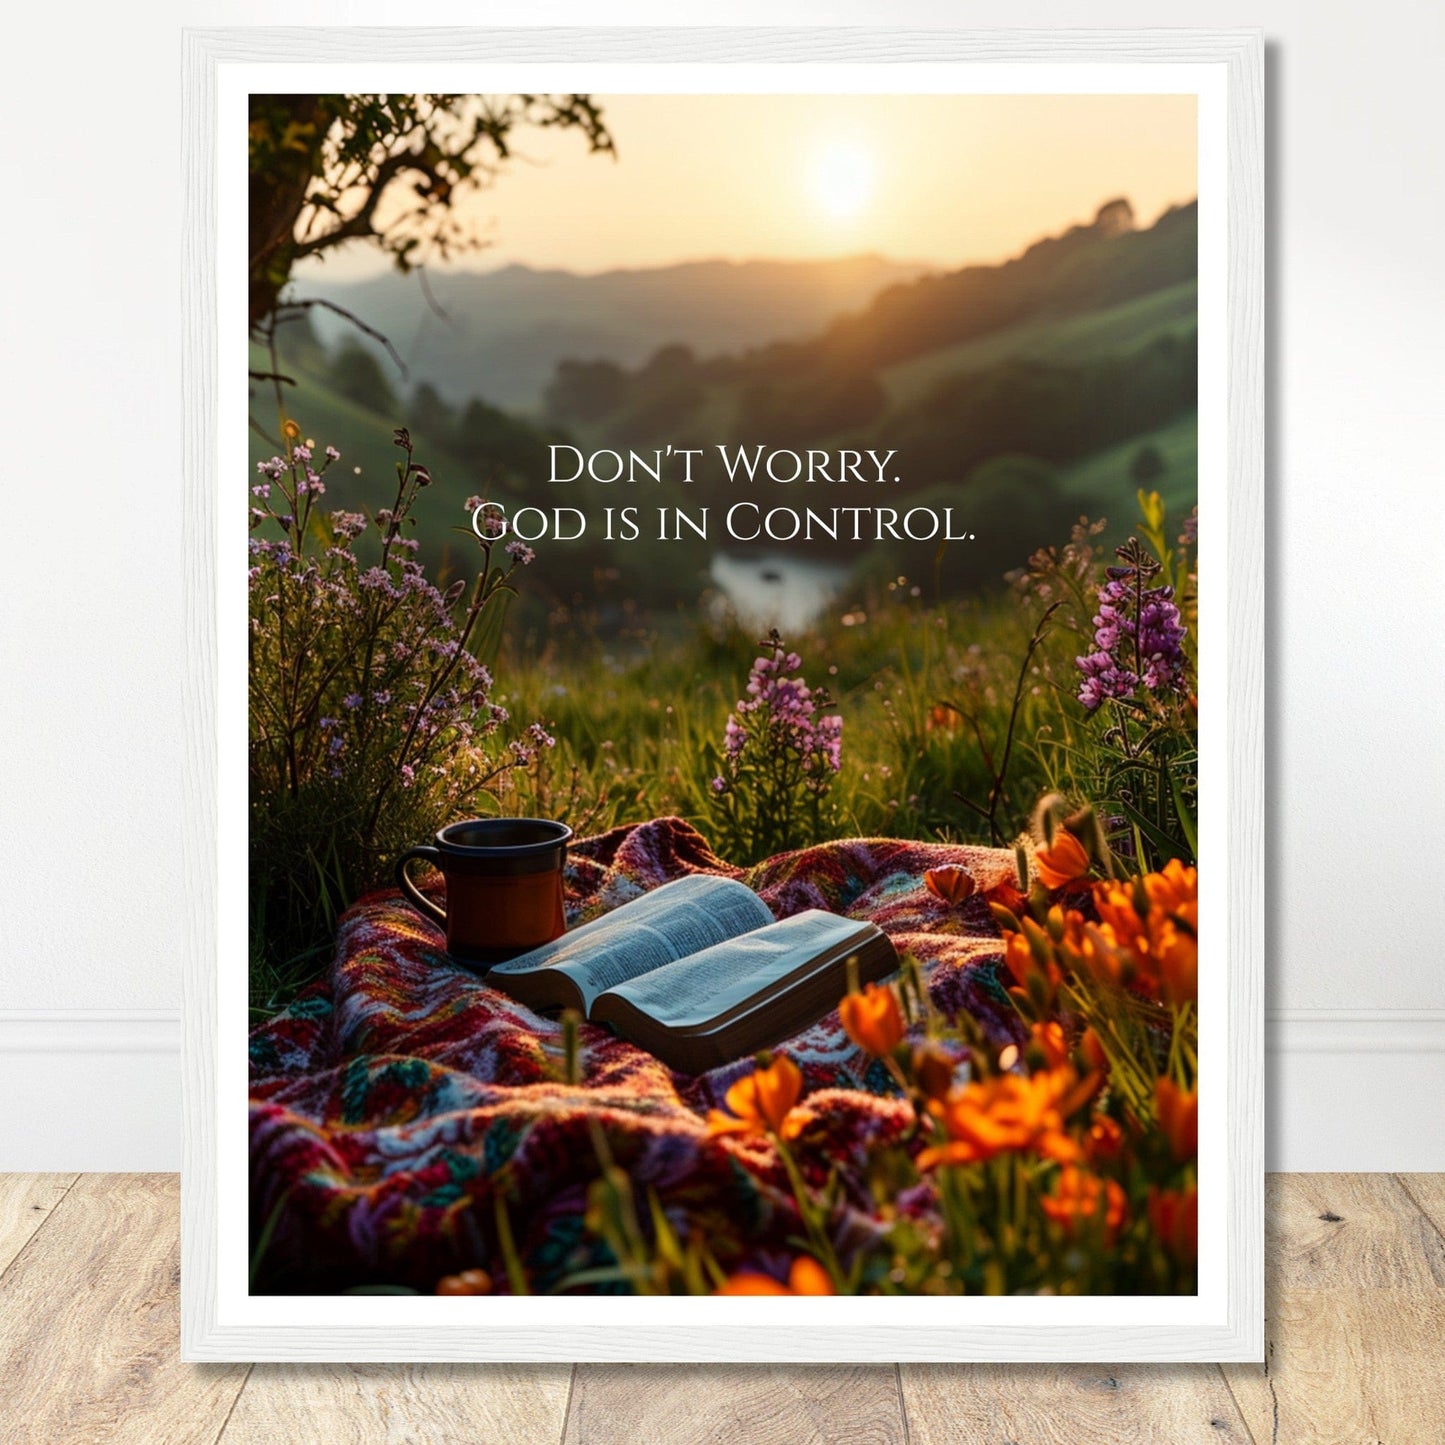 Coffee With My Father Print Material 40x50 cm / 16x20″ / White frame Premium Matte Paper Wooden Framed Poster